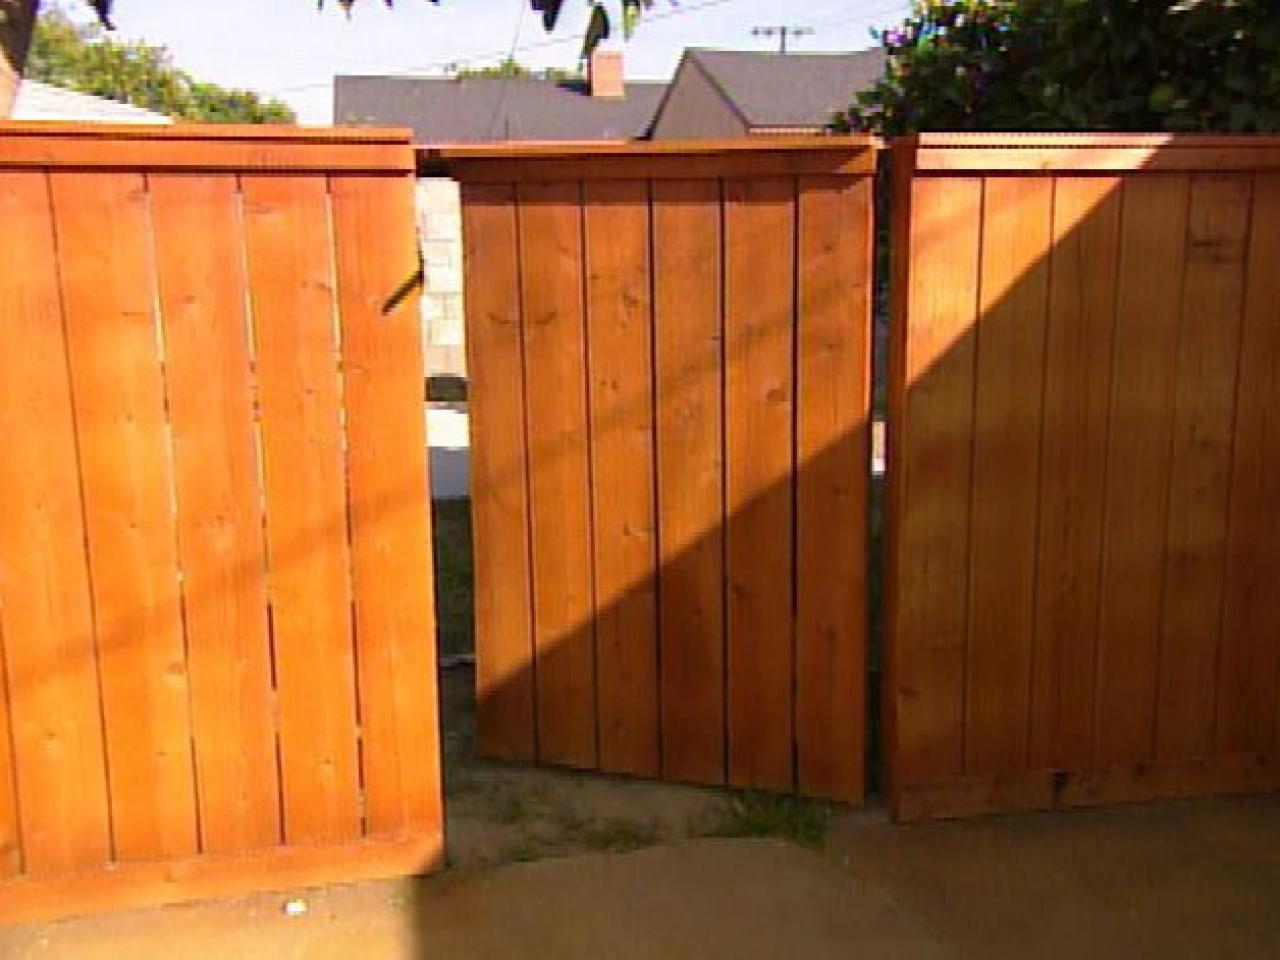 How To Building A Wooden Gate, Wooden Gate Construction Plans